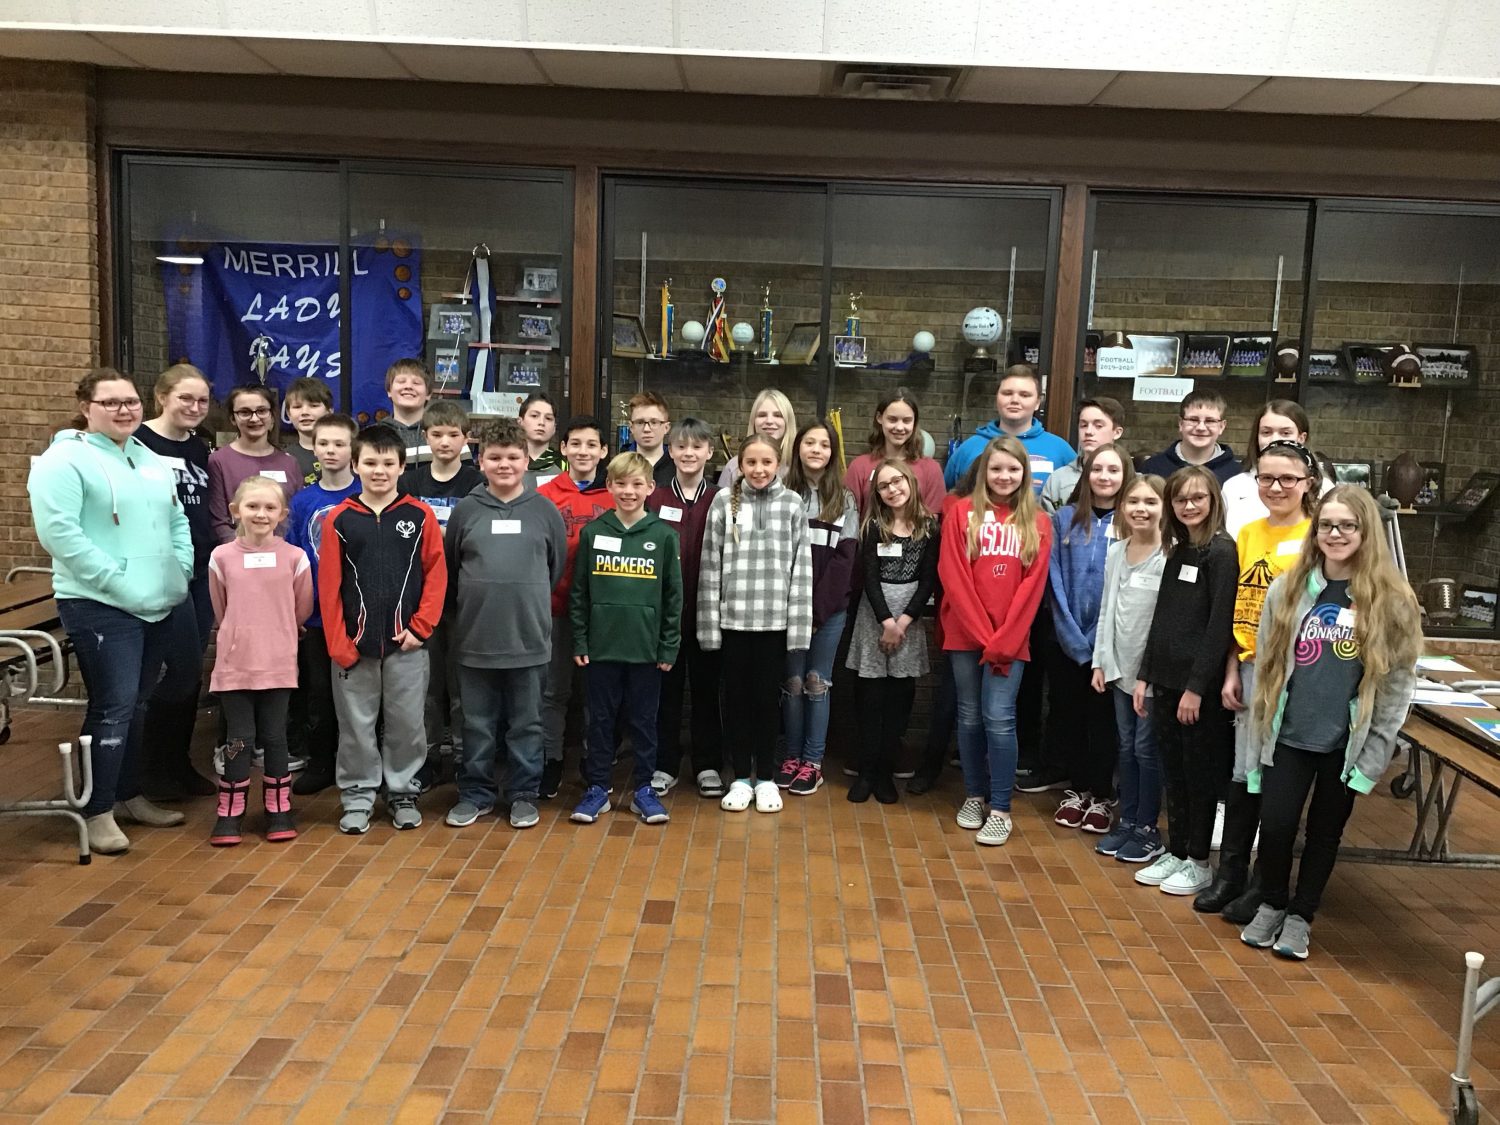 PRMS hosts district Spelling Bee